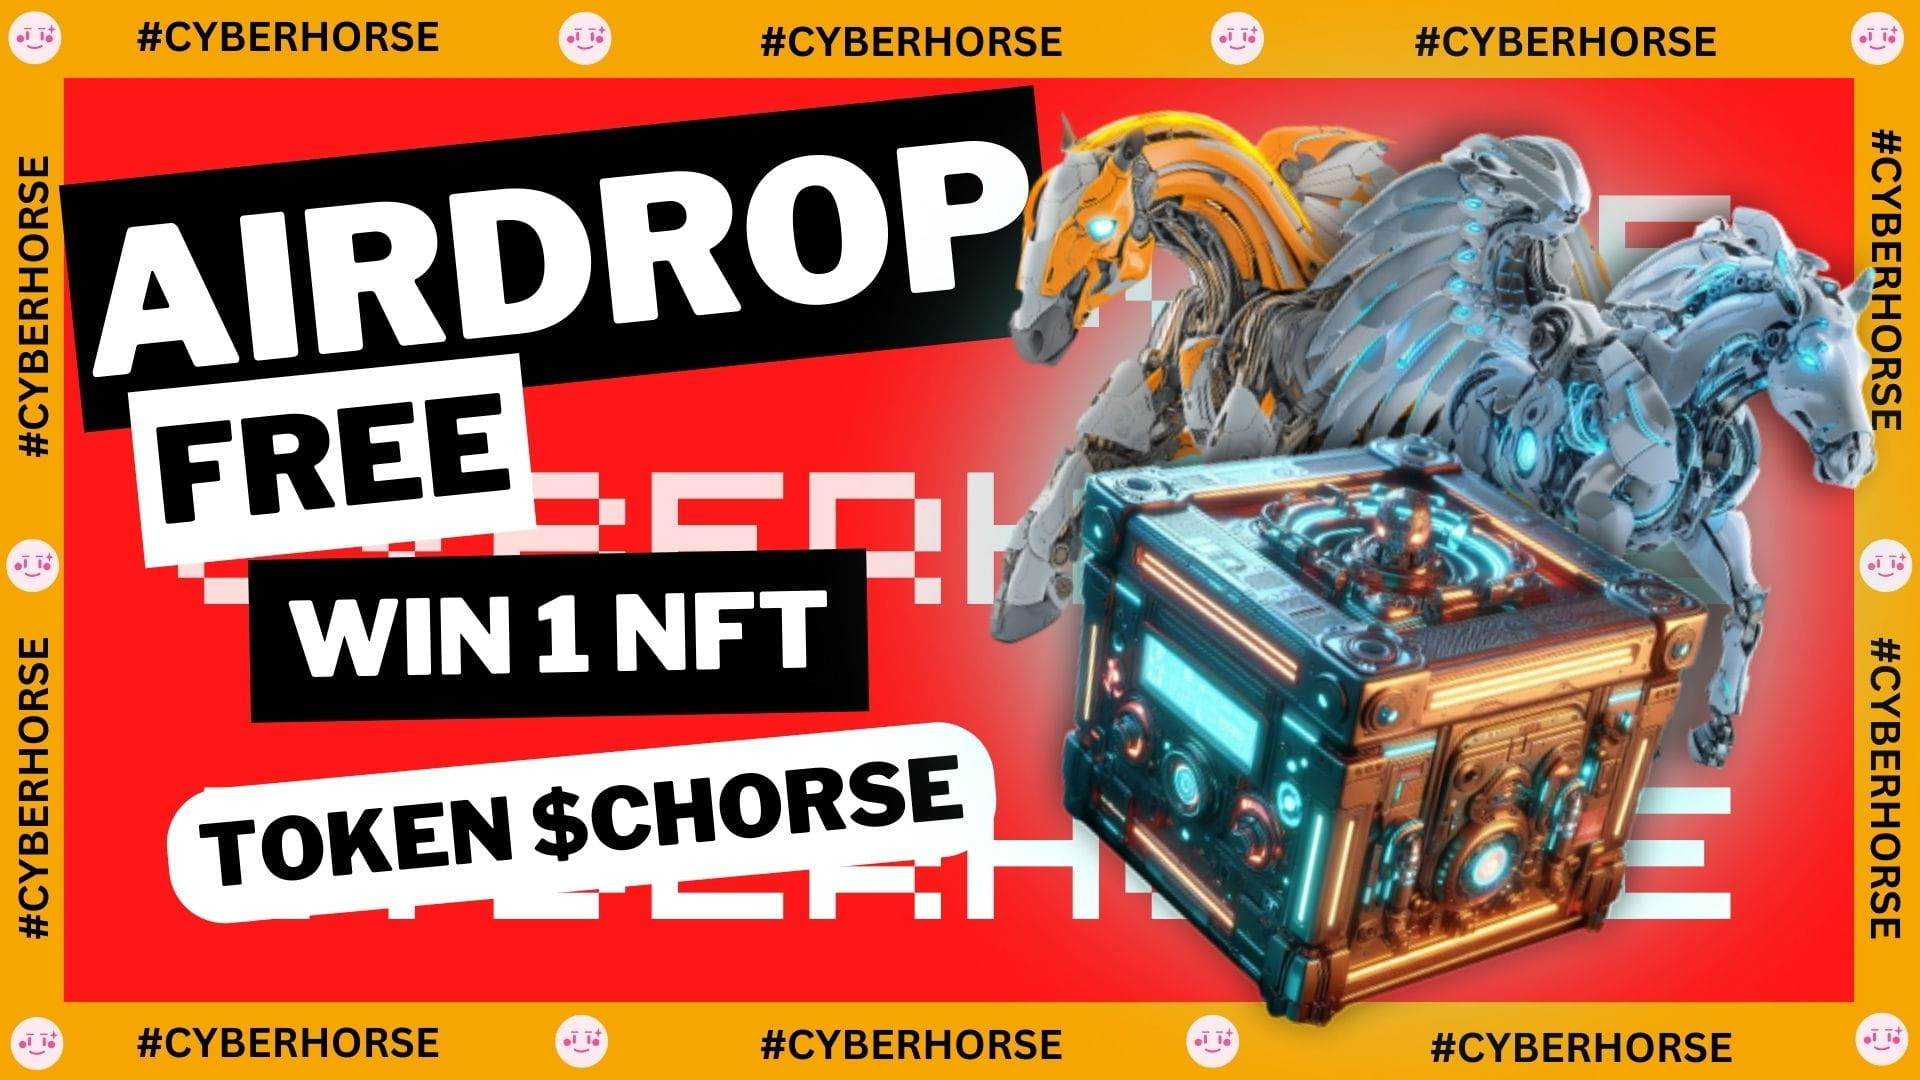 NEW FREE AIRDROP ✅ BOT TELEGRAM 💥 CYBER HORSE GAME WITHOUT INVESTMENT